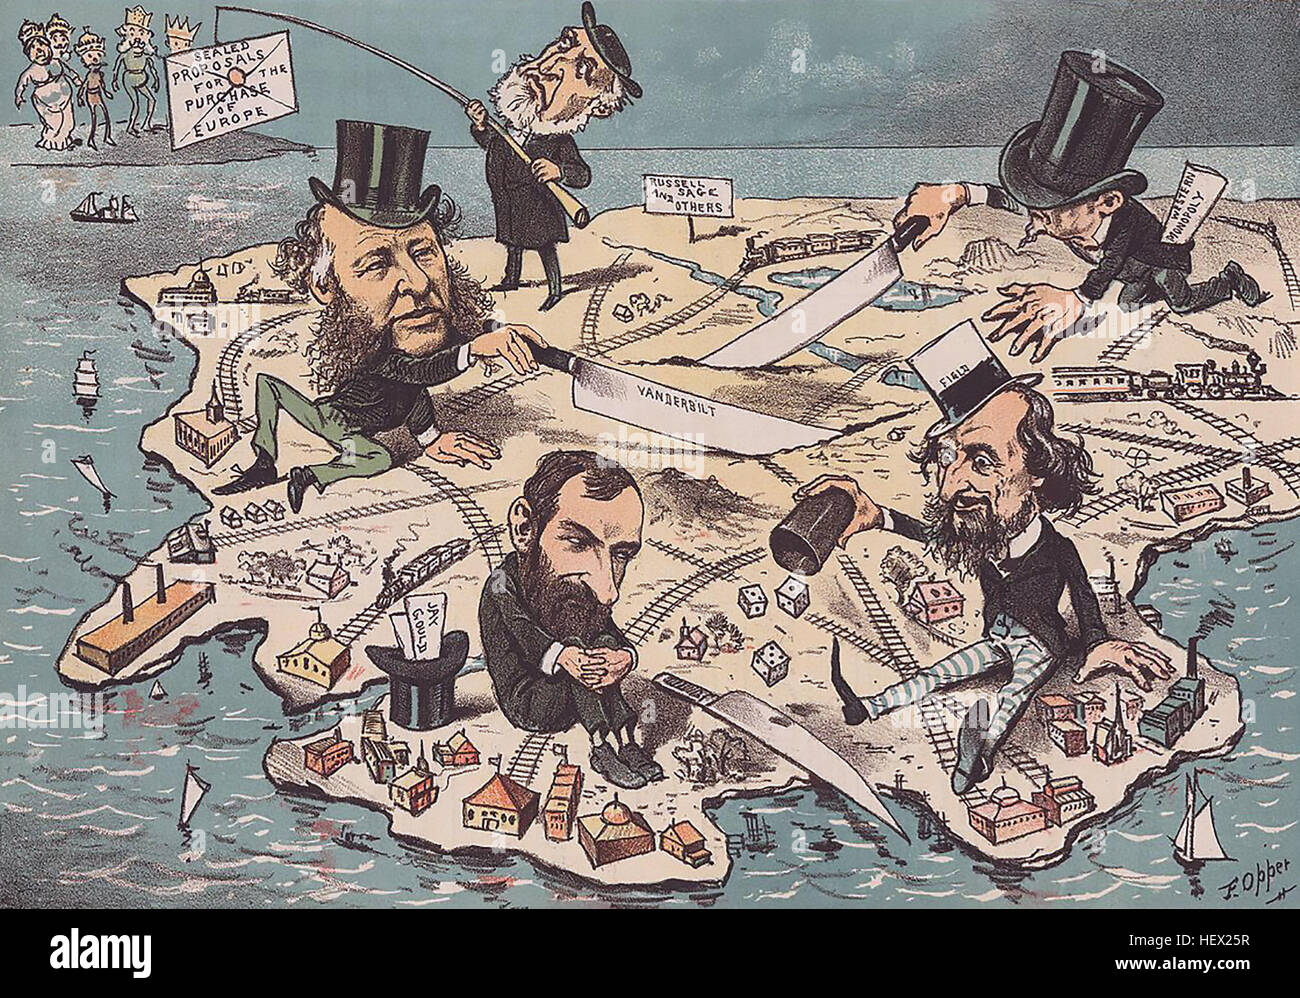 ROBBER BARONS Cartoon from American satirical magazine Puck in January 1885 showing American millionaires playing Monopoly with the country's assets. From left: William Vanderbilt, Cyrus West Field, Jay Gould, Russell Sage, Cyrus West Field. Stock Photo